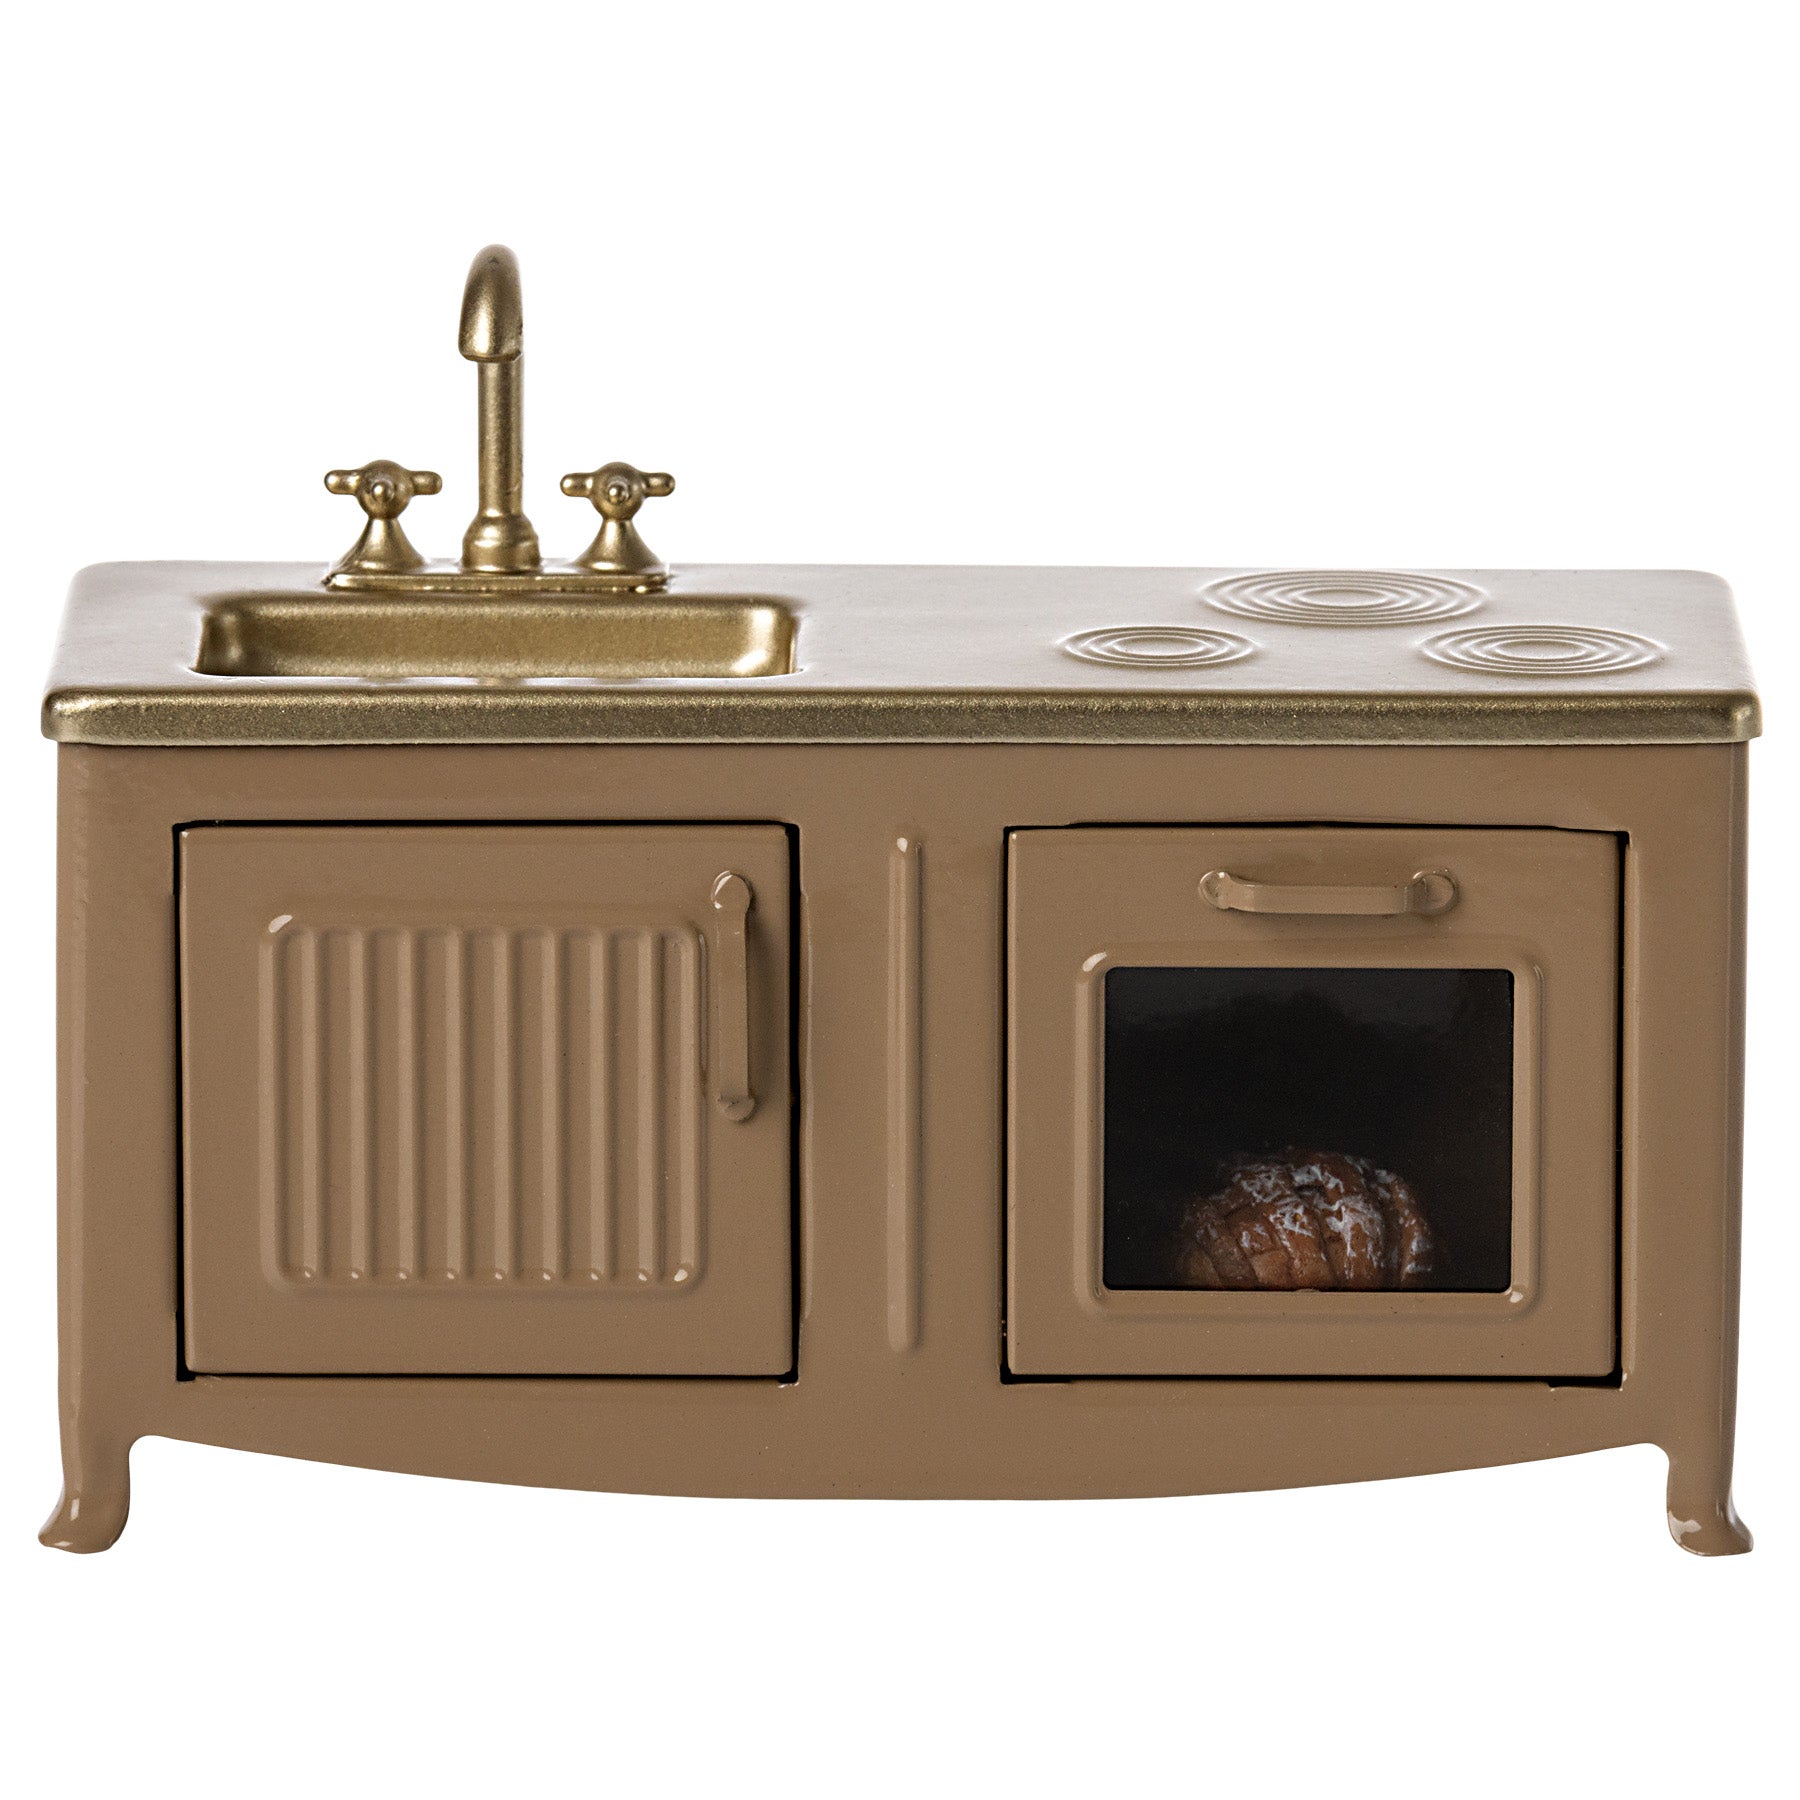 maileg mouse light brown kitchen with a sink & taps, hob, a cuboard and oven with a loaf of bread inside